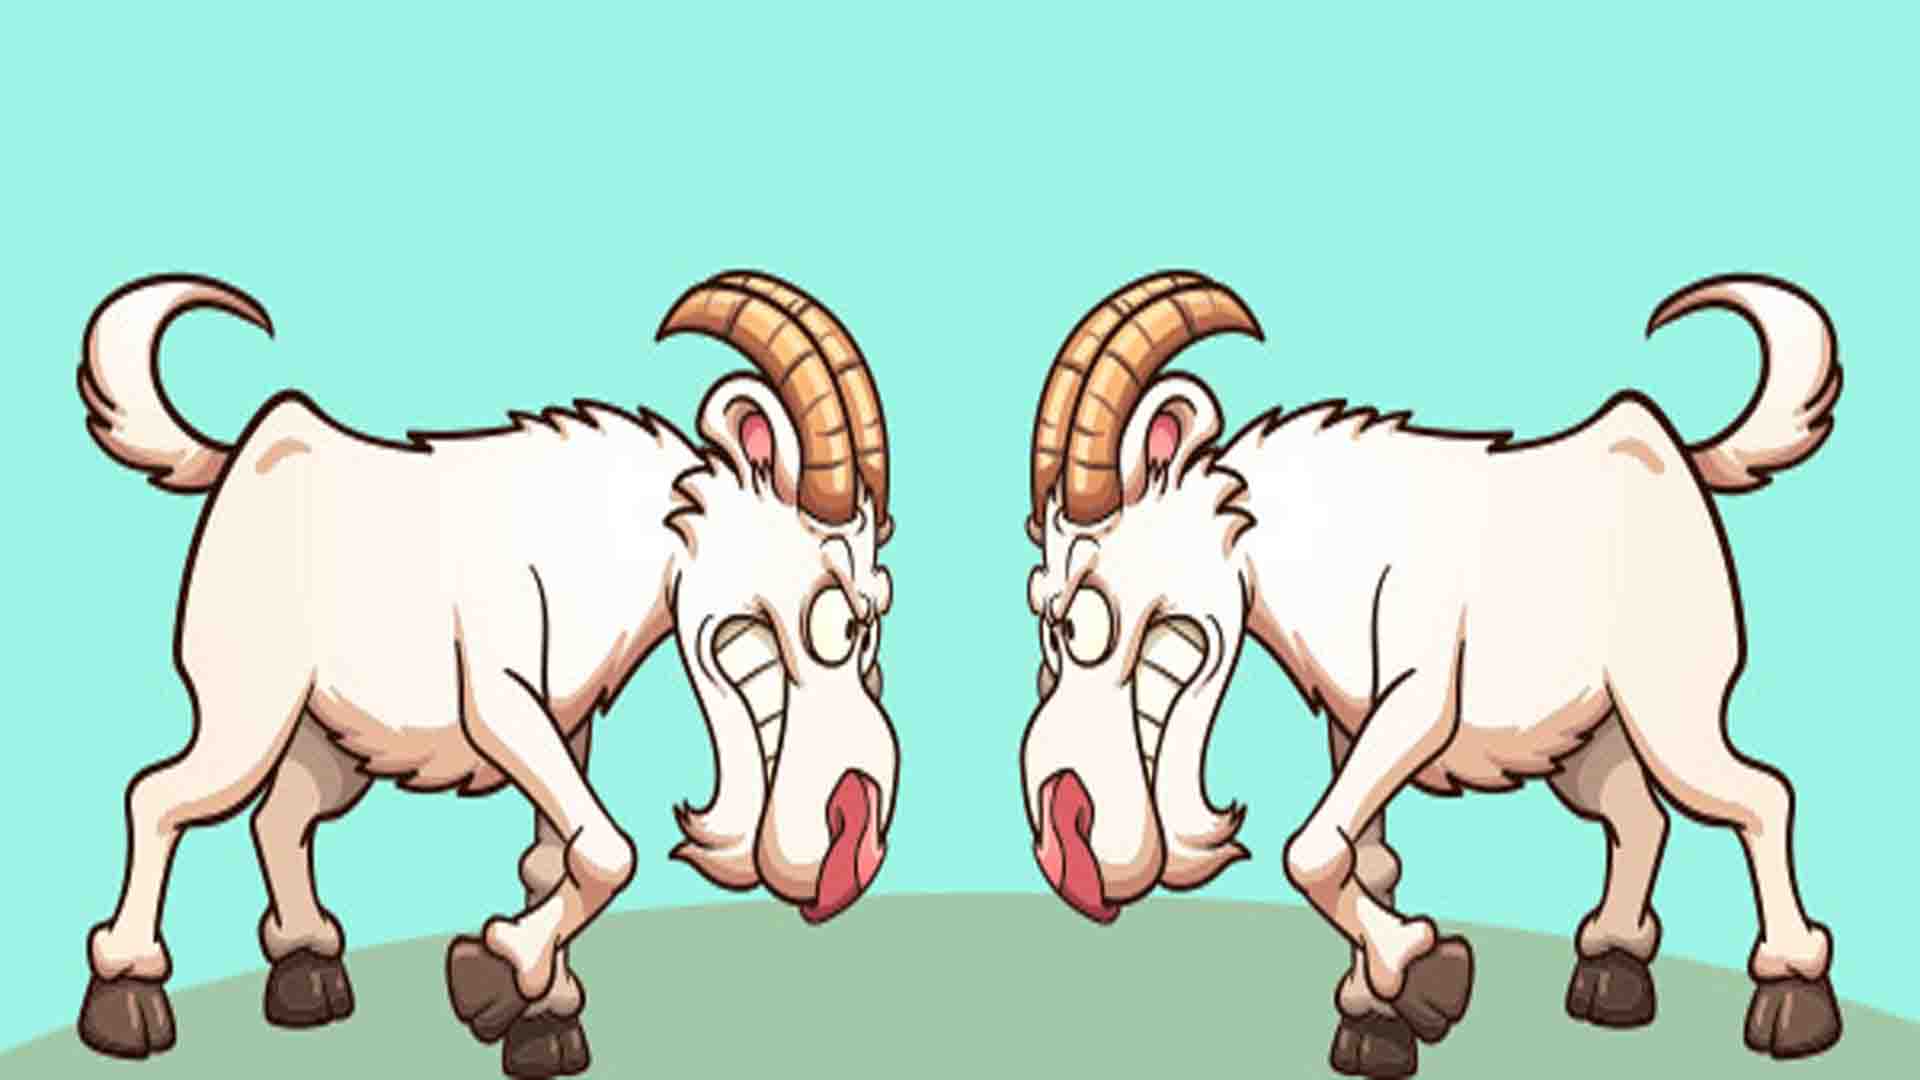 The stubborn goats english stories for kids | short story for kids